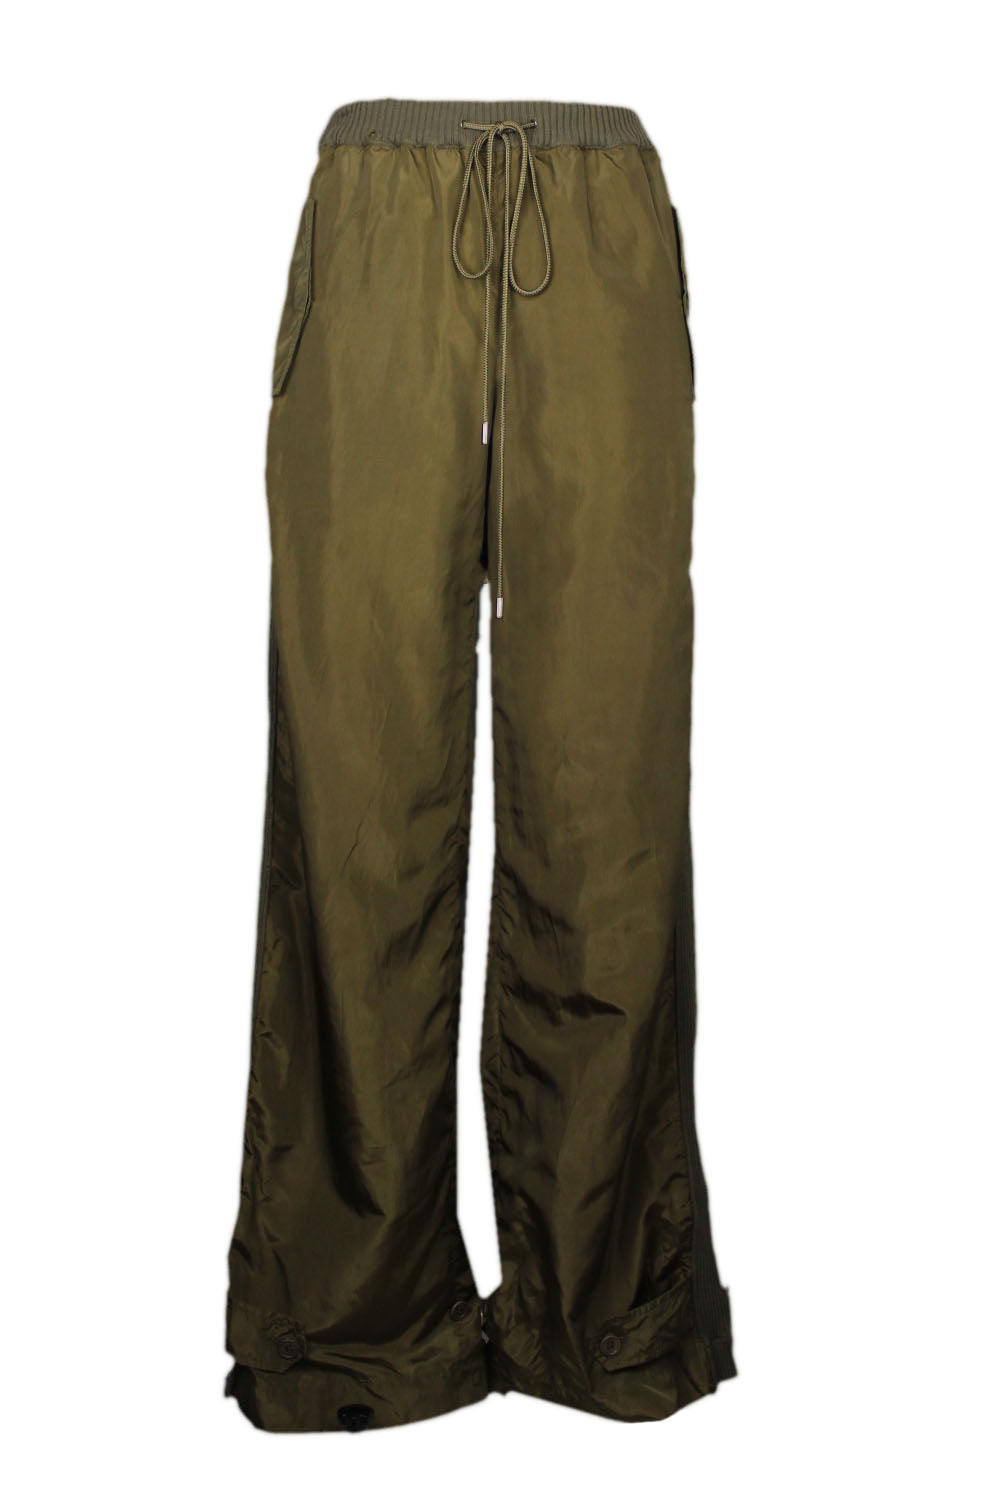 front of alberta ferretti olive green tech slouchy pants. drawstring adjustable waist. pockets at sides. slouchy long legs. 